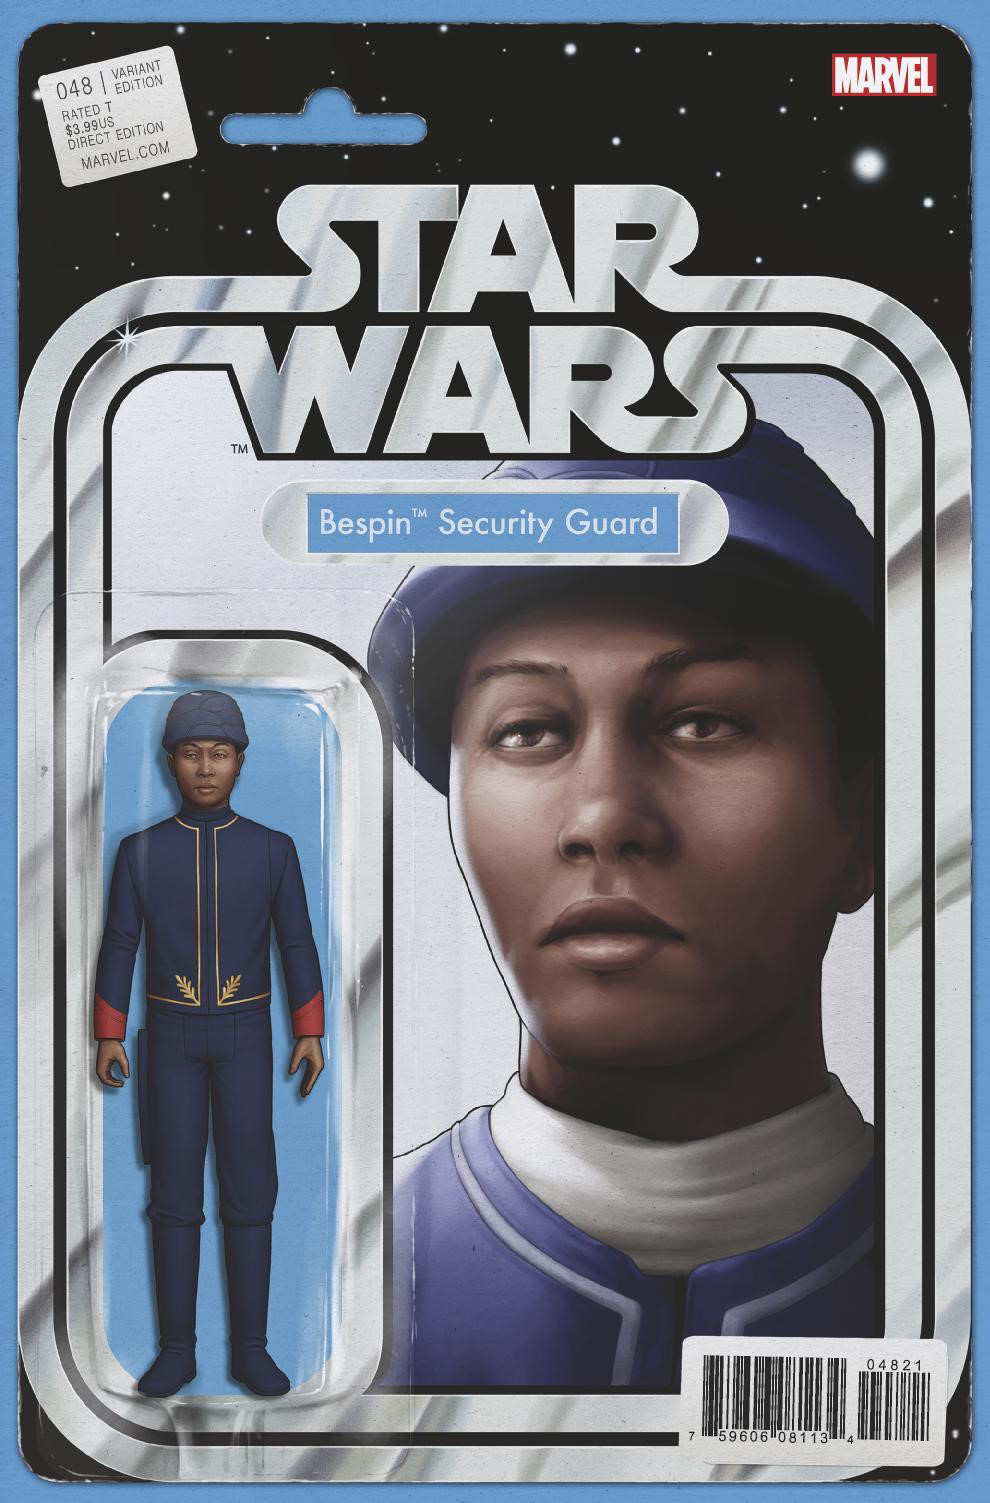 Star Wars #48 (Action Figure Variant Cover) (23.05.2018)